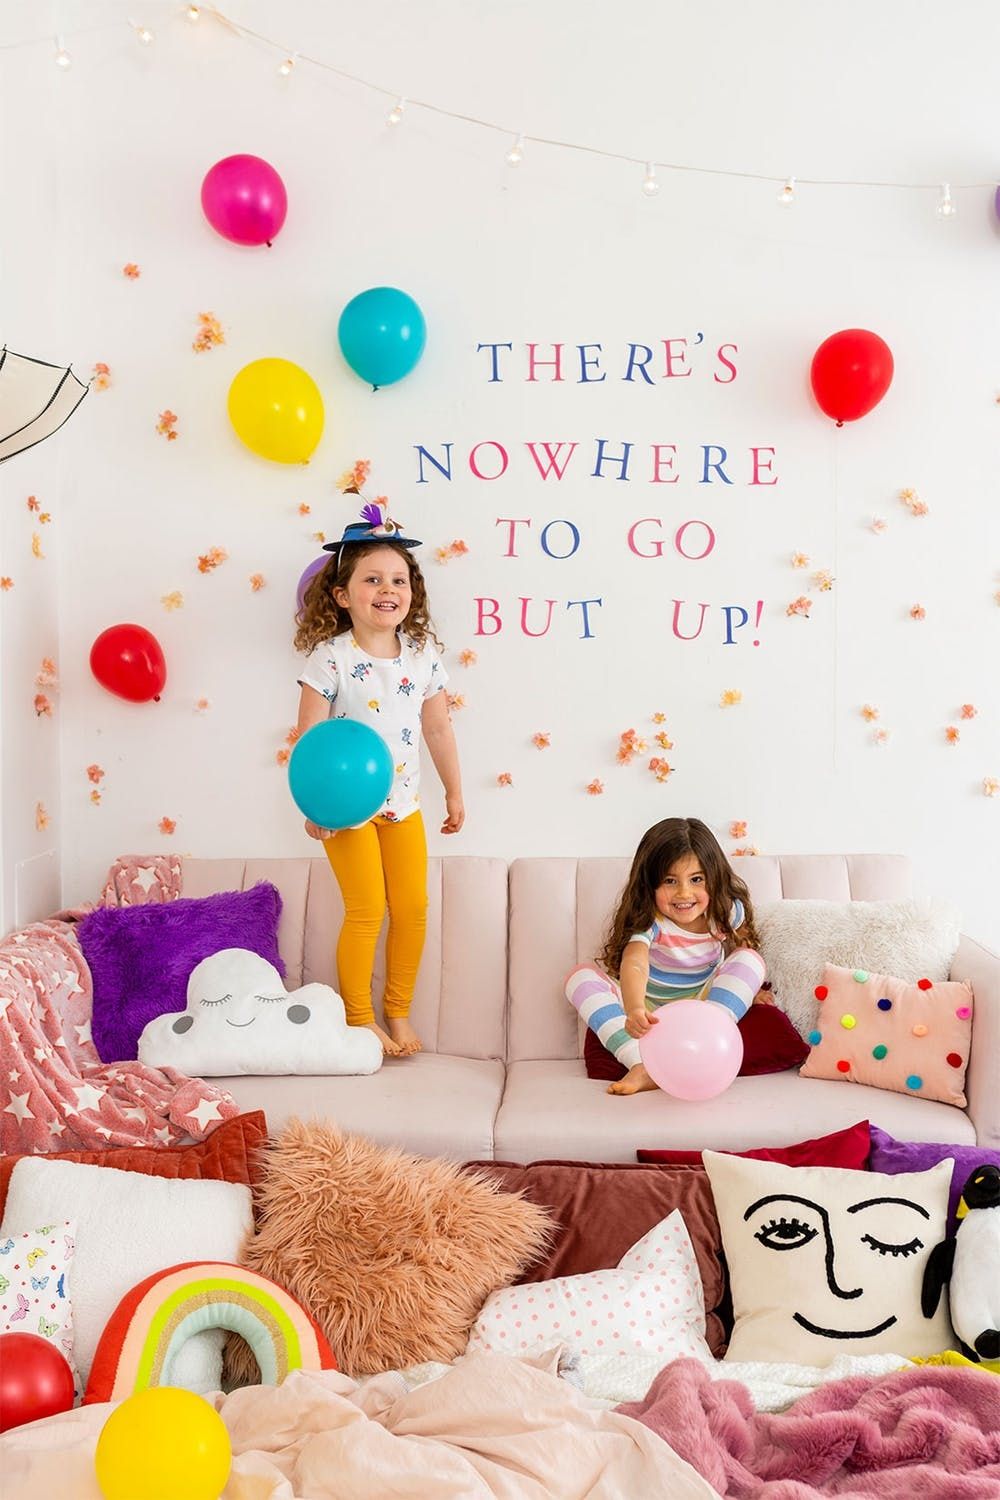 7 Creative Slumber Party Ideas That Will Put Girly Movies to Shame